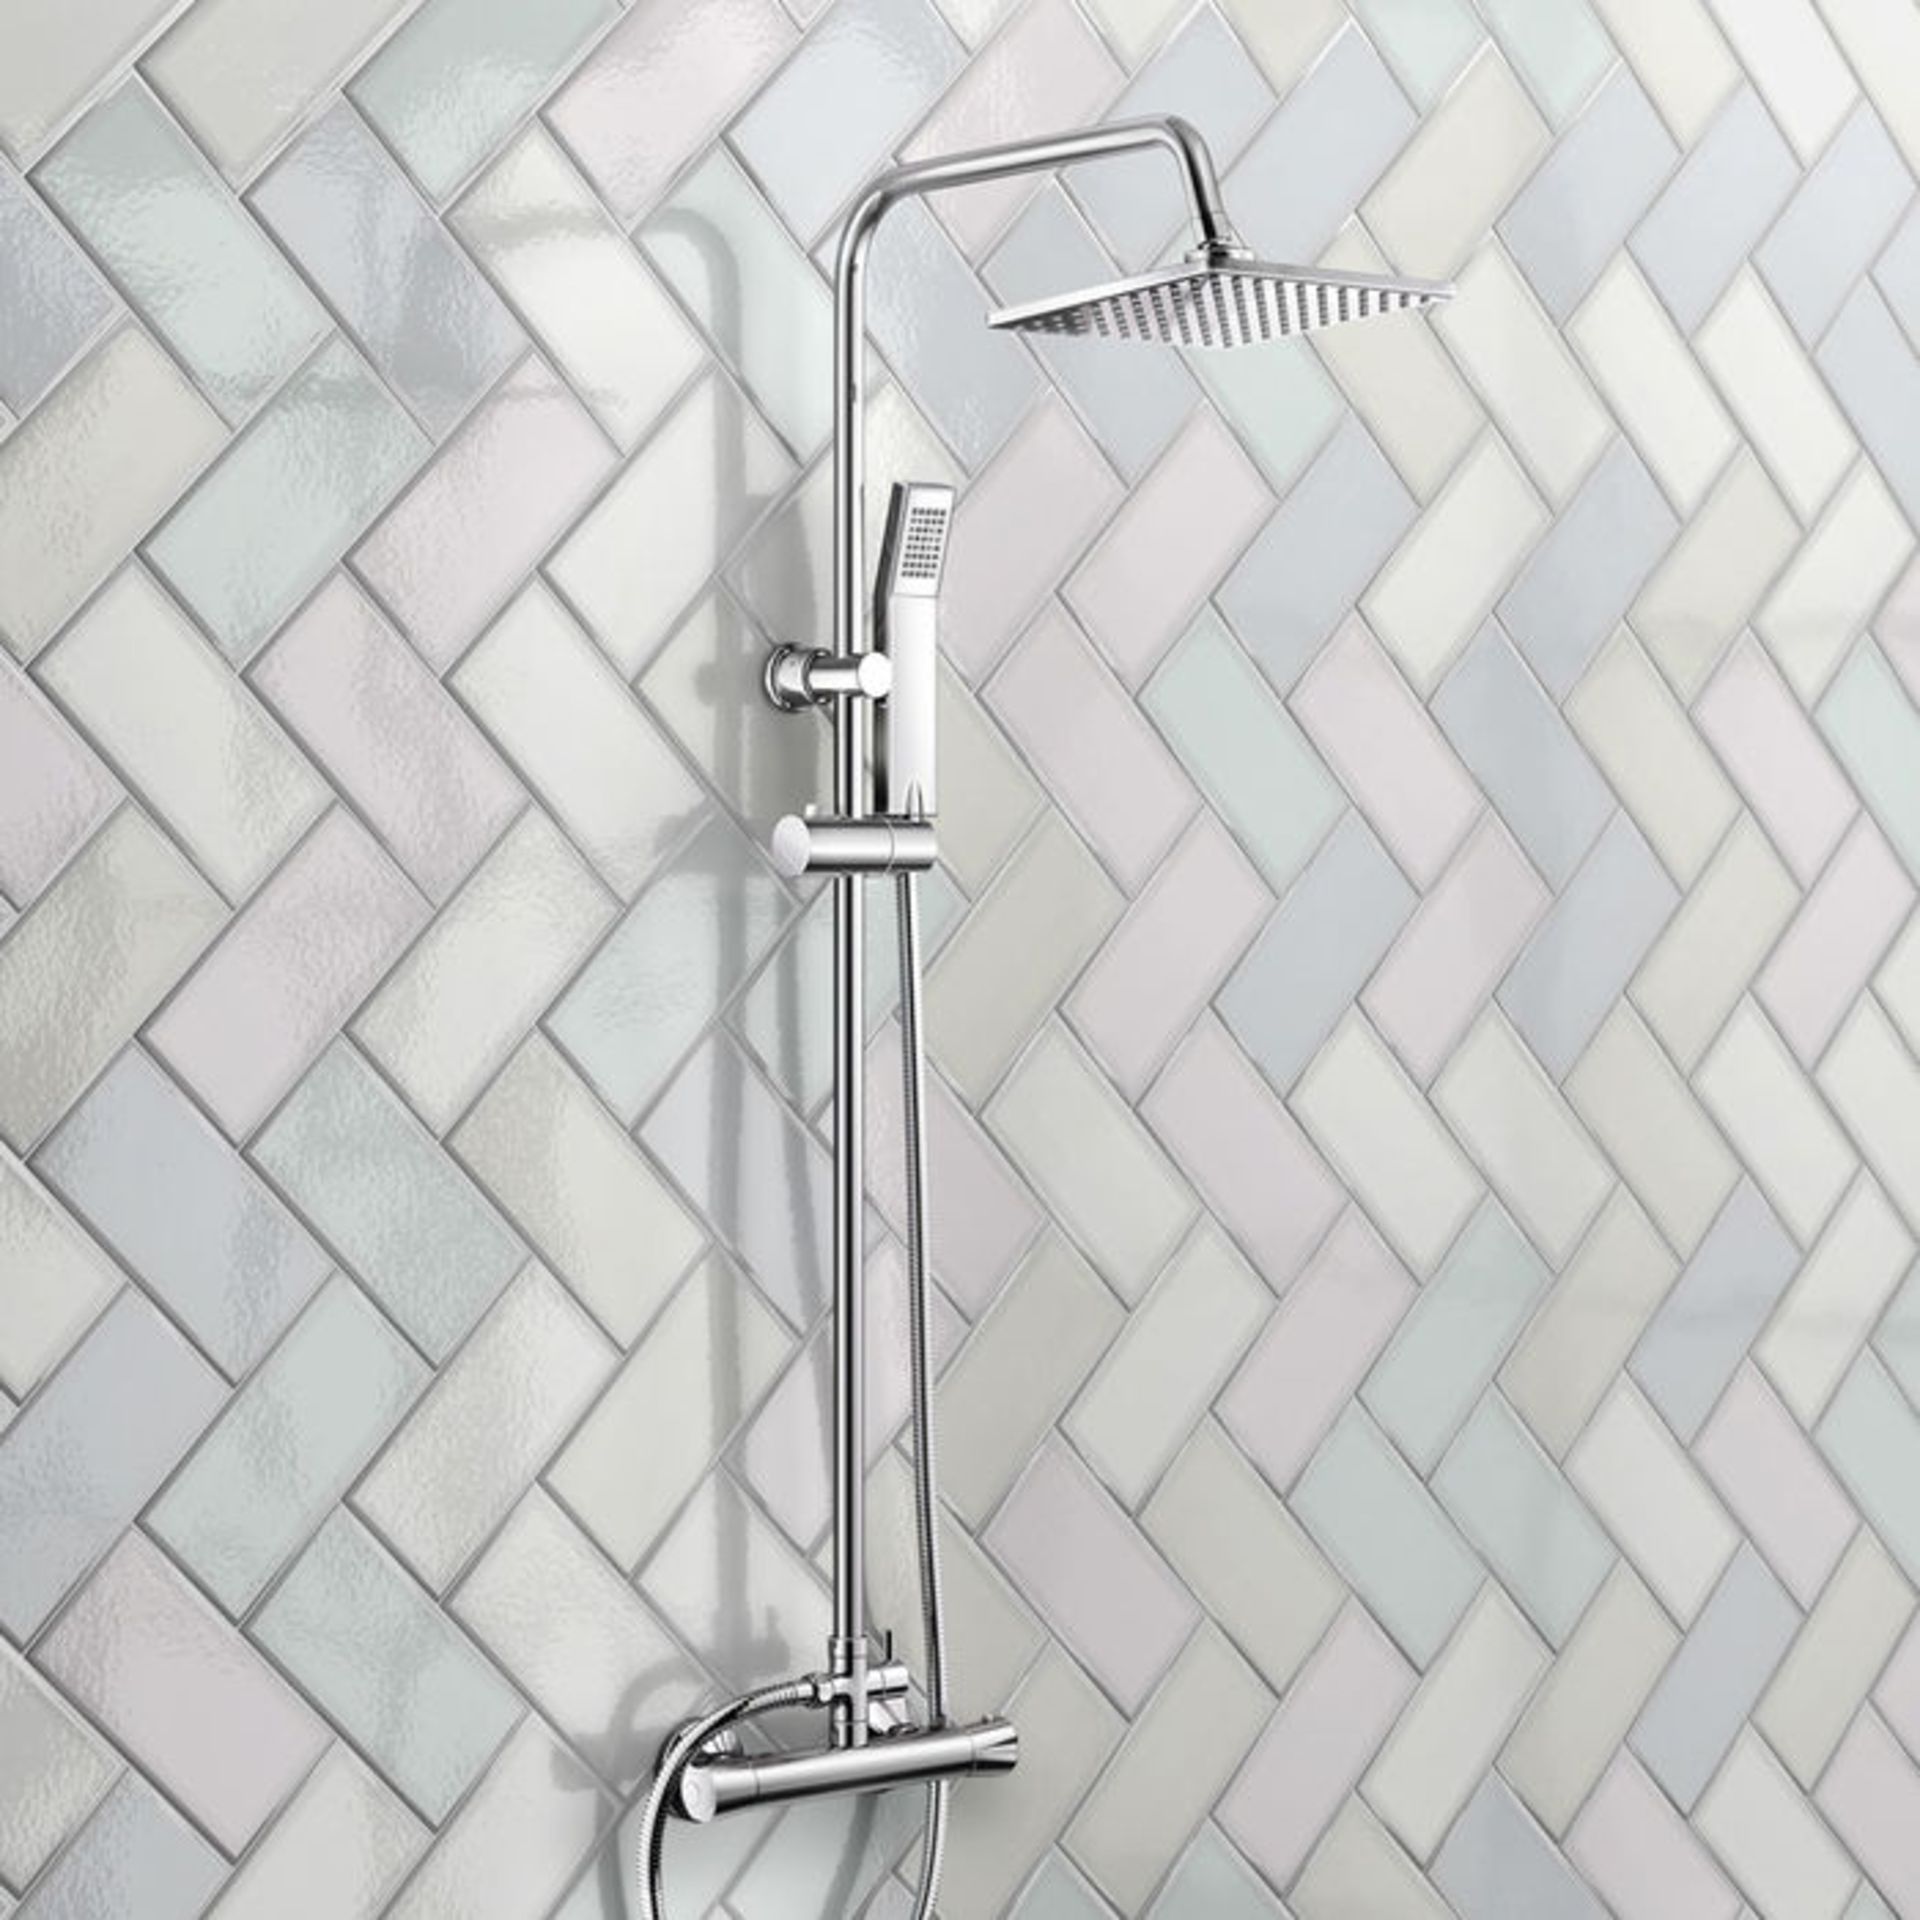 (AZ36) Square Exposed Thermostatic Shower Kit & Medium Head. Curved features and contemporary - Image 3 of 4